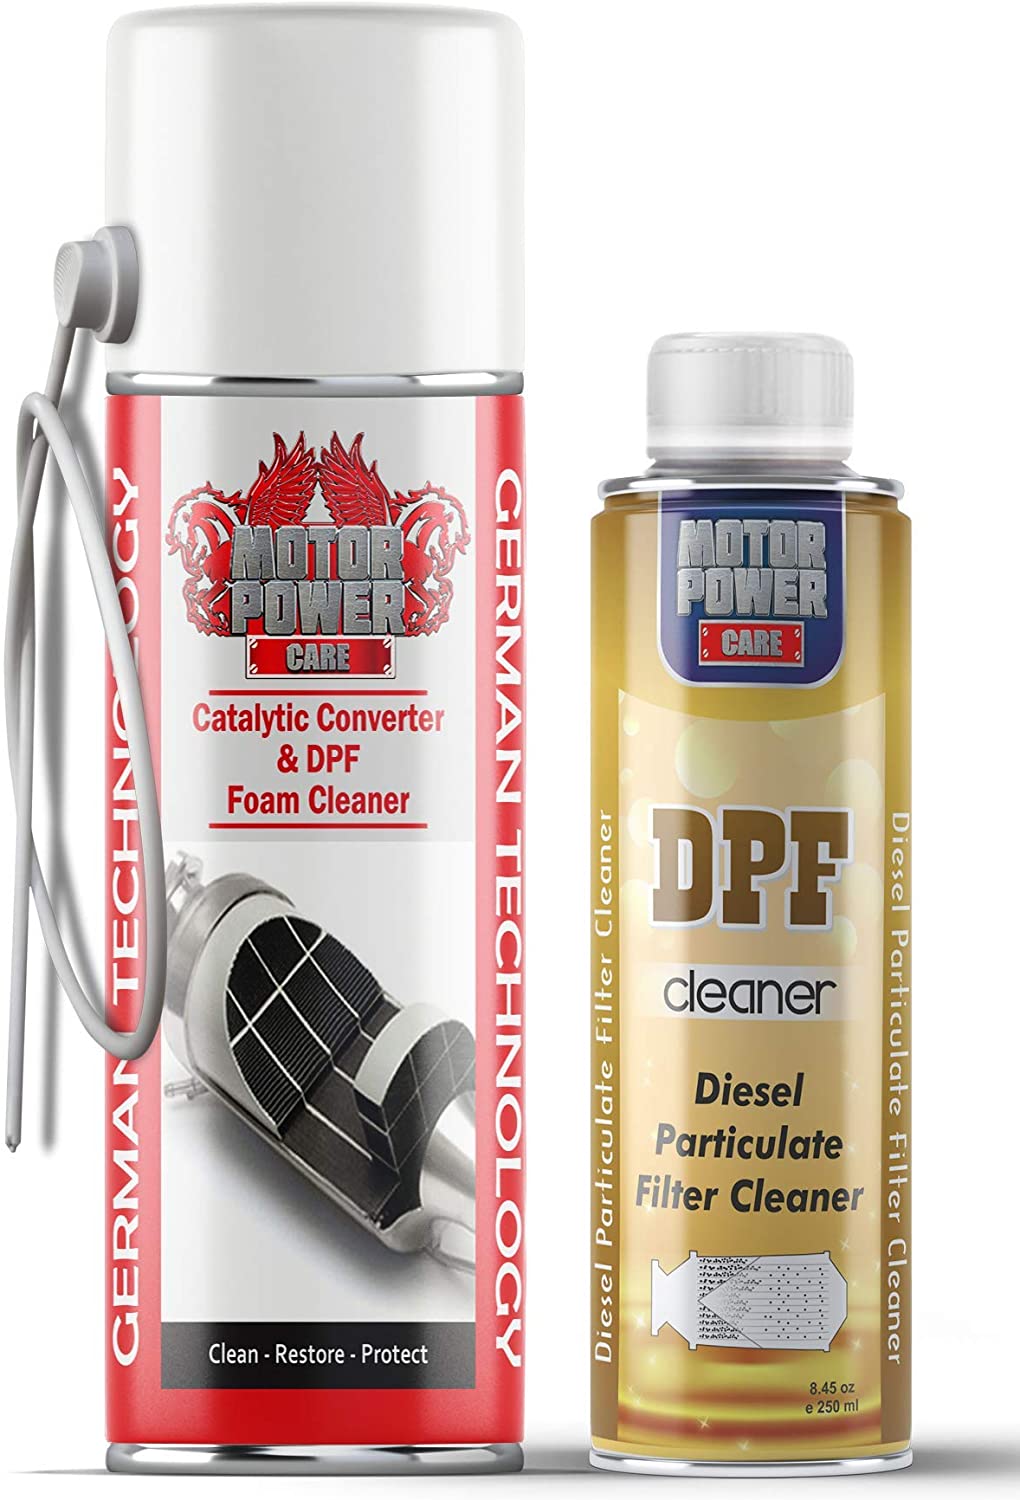 <strong>1. DPF Diesel particulate Filter Cleaner</strong>